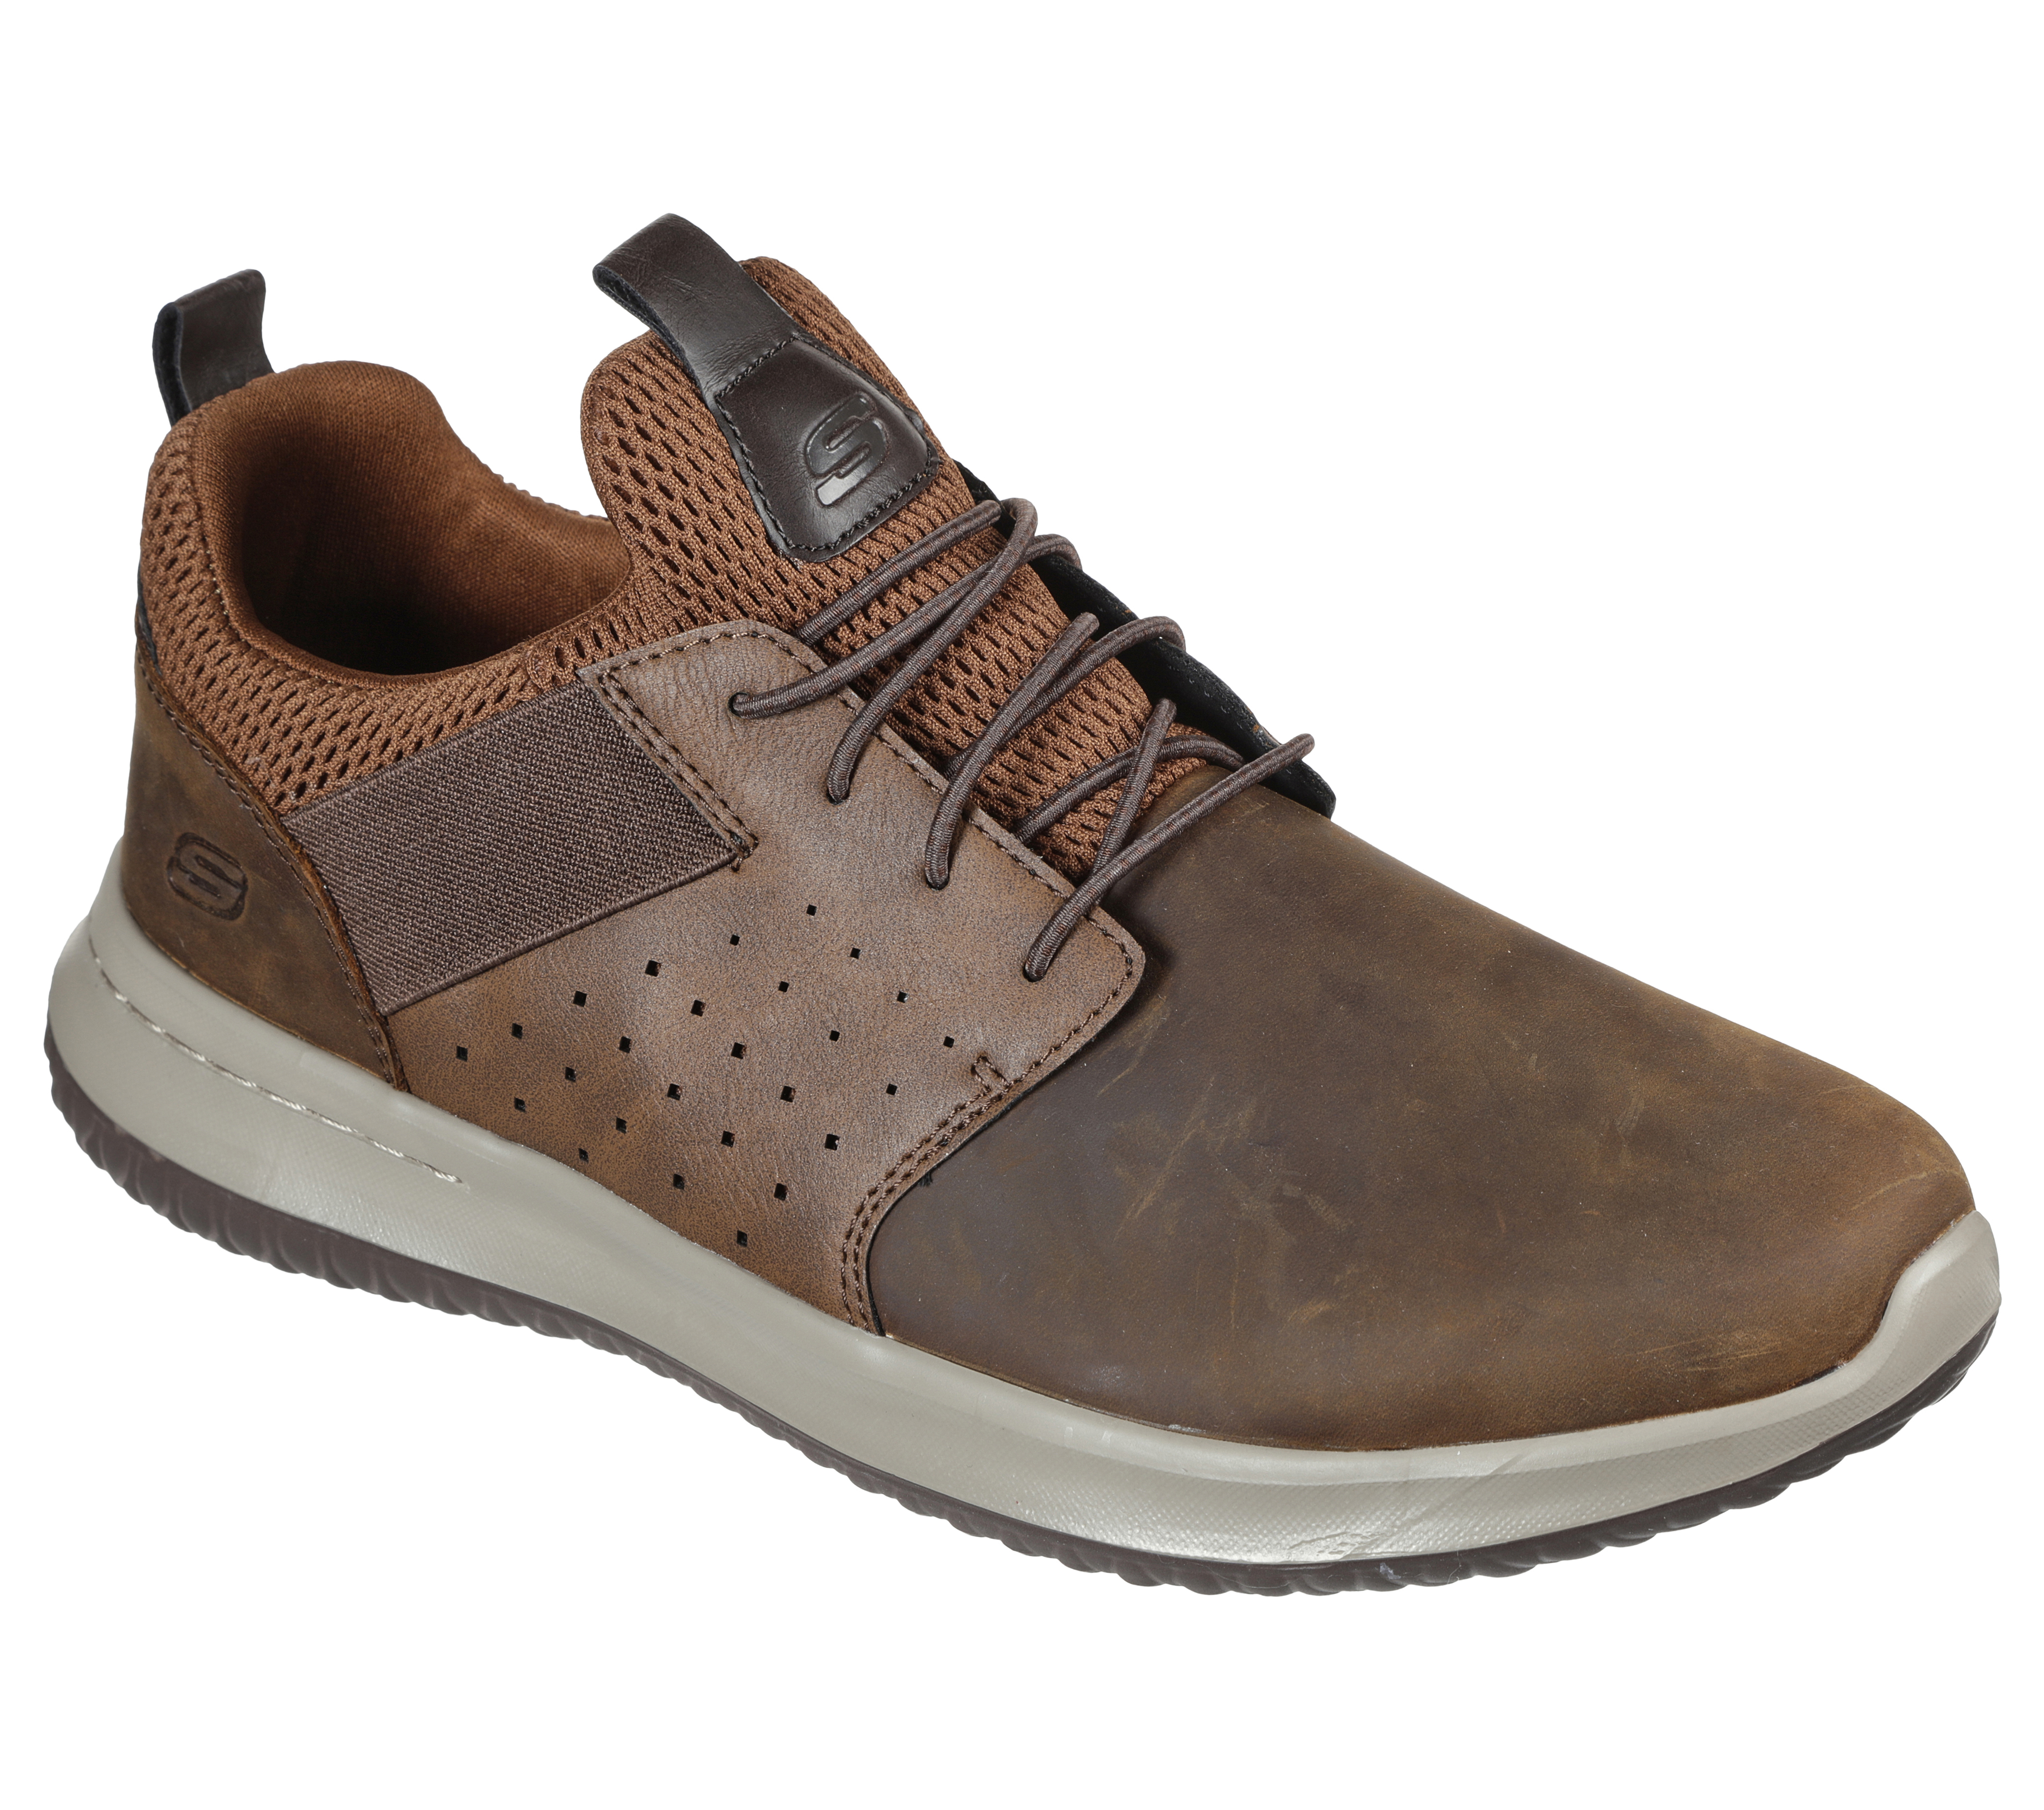 Shop the Delson - Axton | SKECHERS